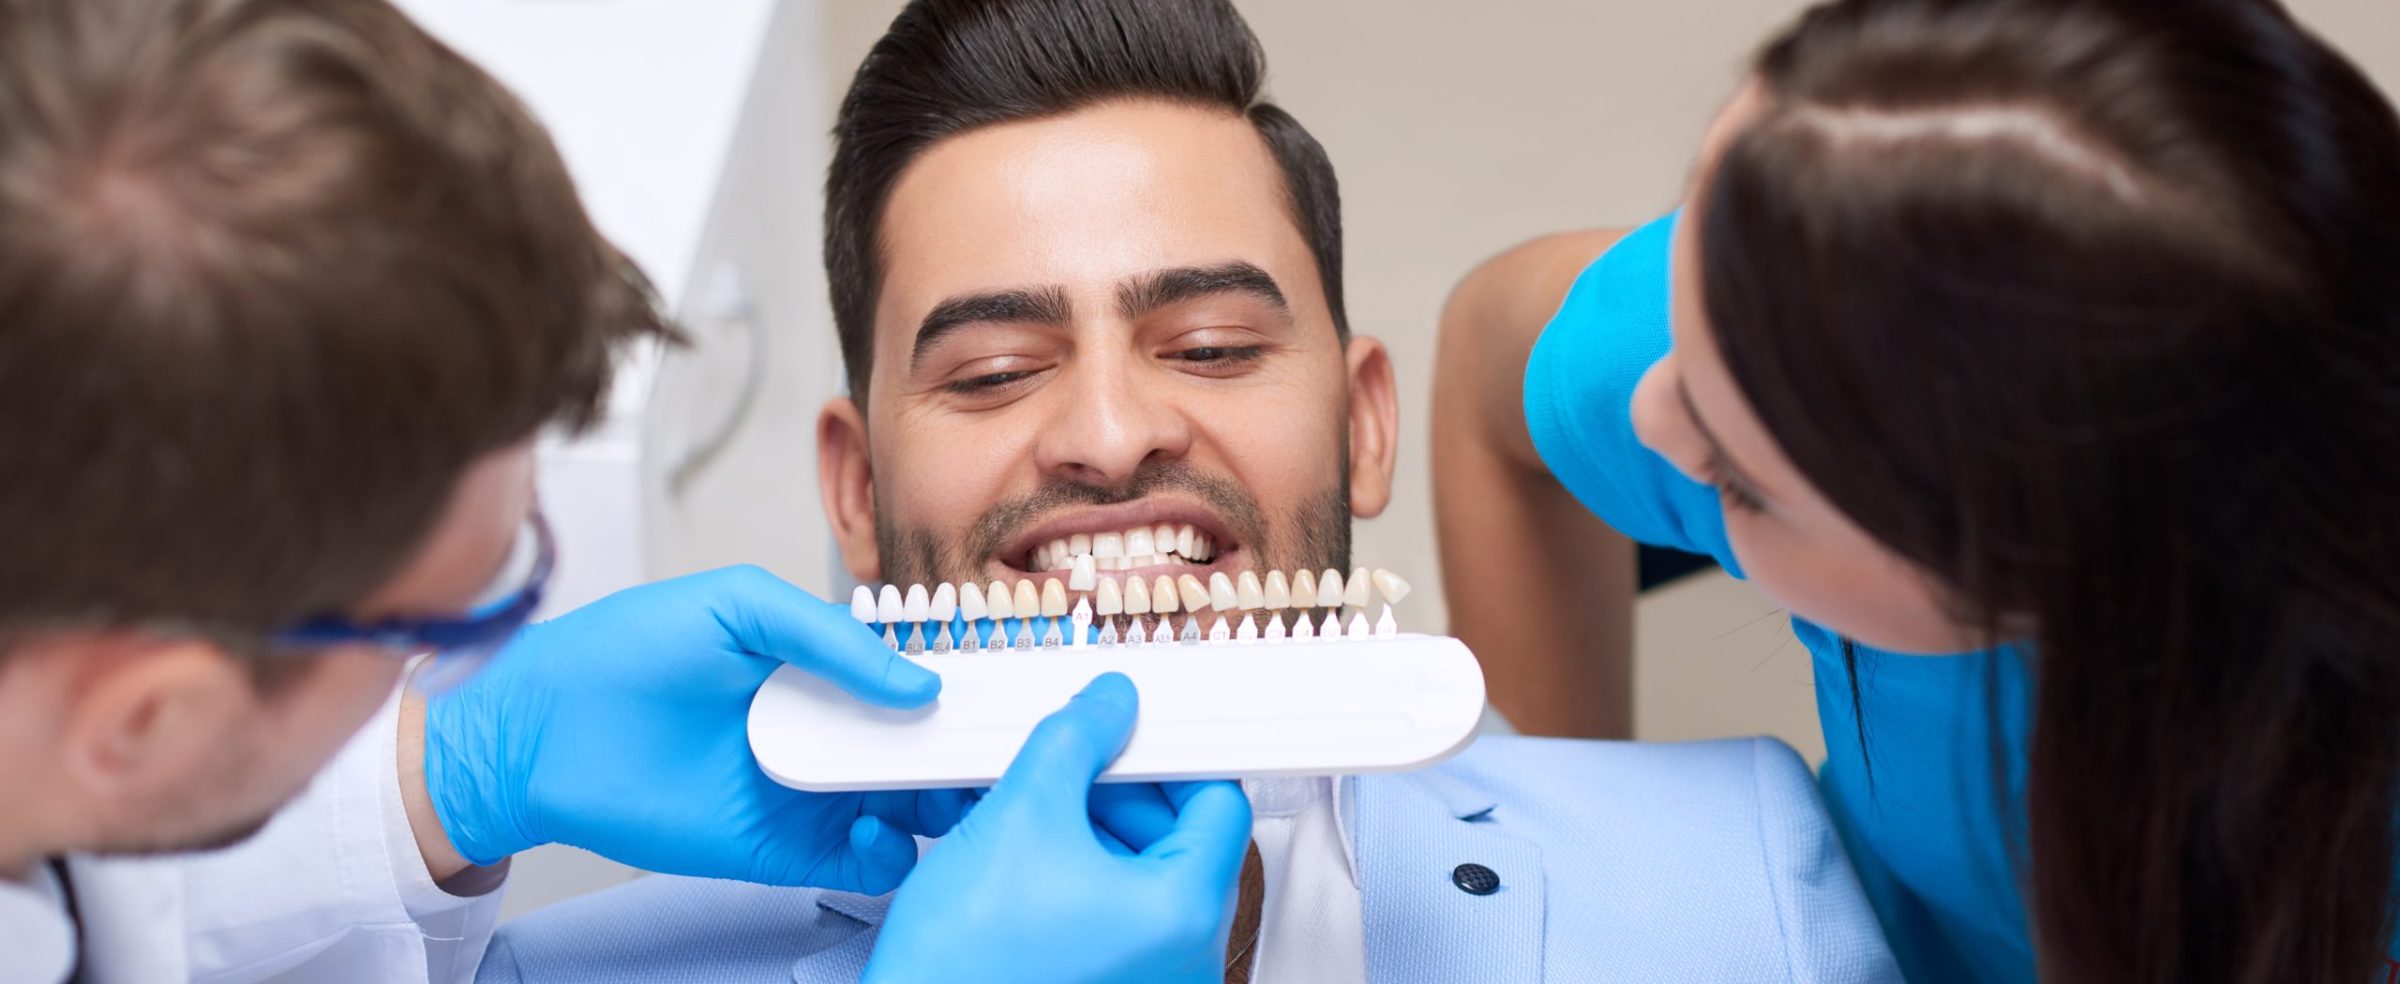 Top view shot of a profesisonal dentist wirking with assistance of the nurse choosing perfect matching color of implants for his male patient teeth medicine healthcare whitening dentures.